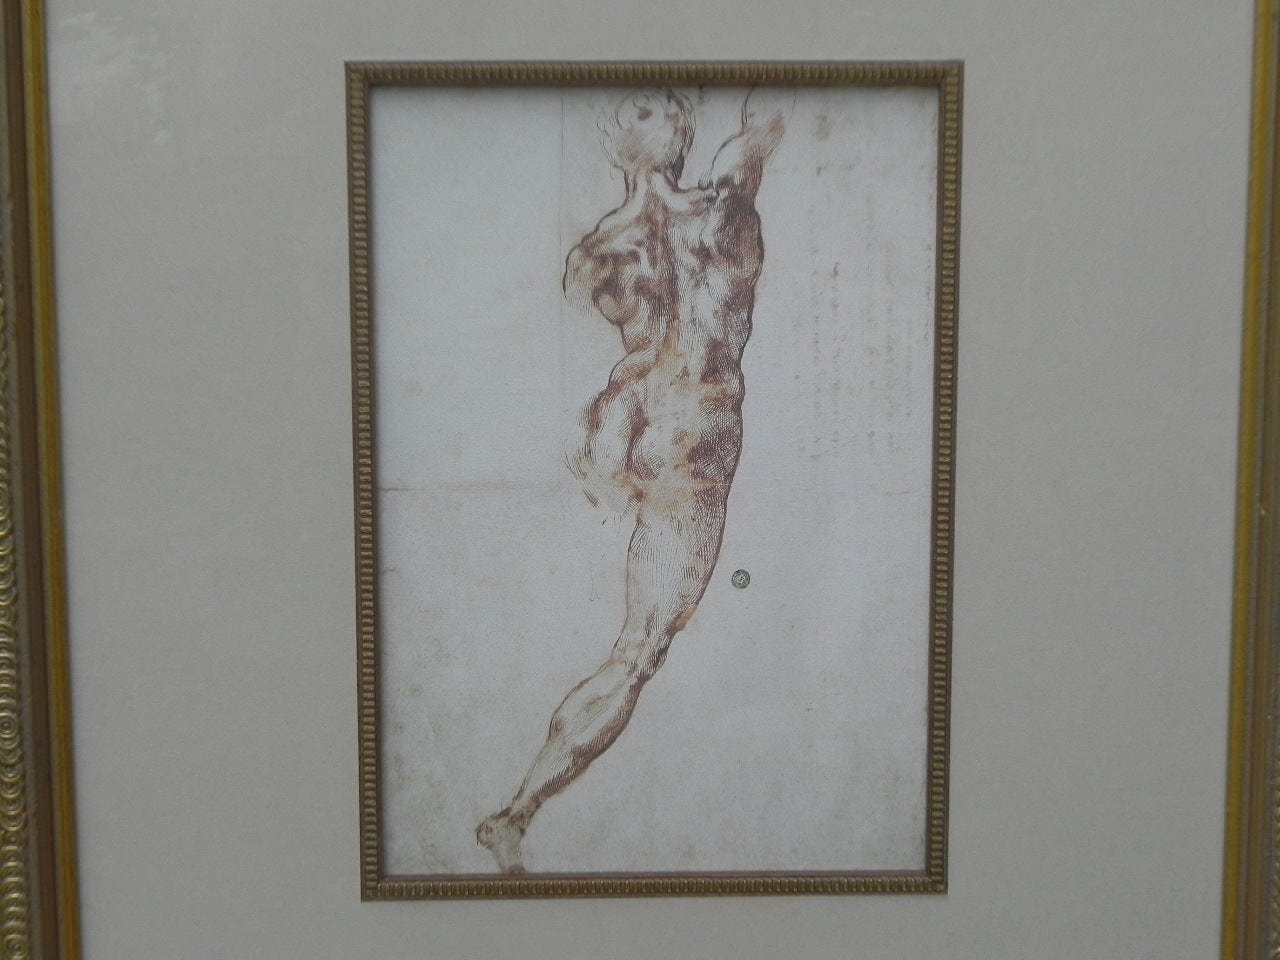 I Like Mike's Mid Century Modern Wall Decor & Art Classic Male Nude Drawing in Ornate Frame #1